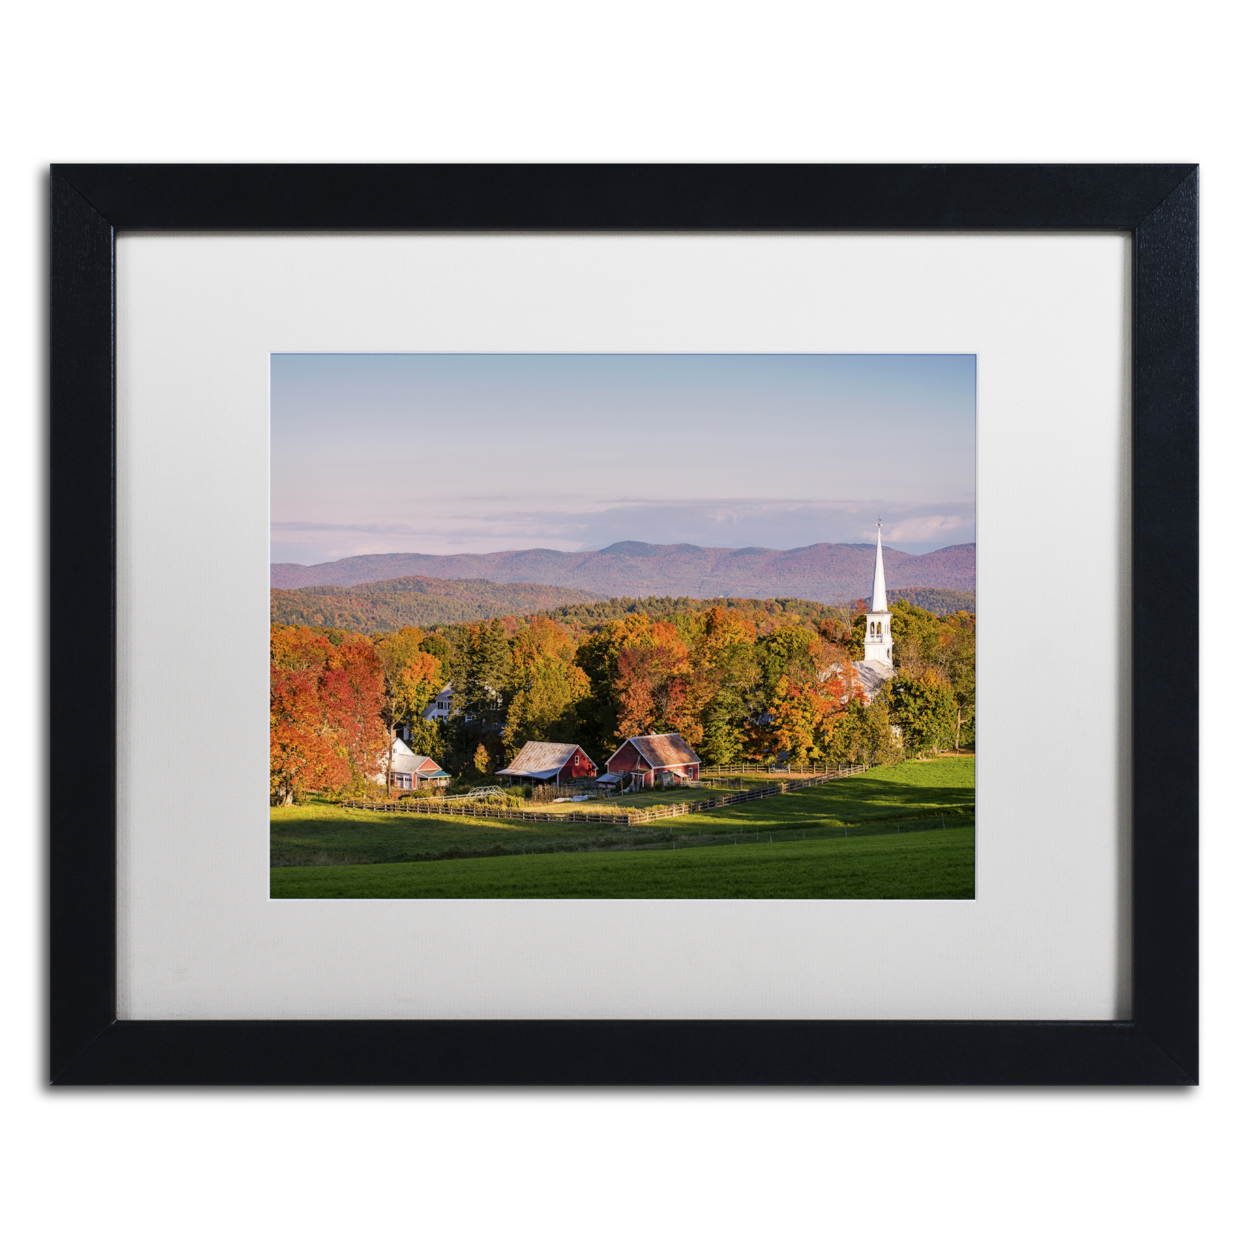 Michael Blanchette Photography 'Rural Attraction' Black Wooden Framed Art 18 X 22 Inches